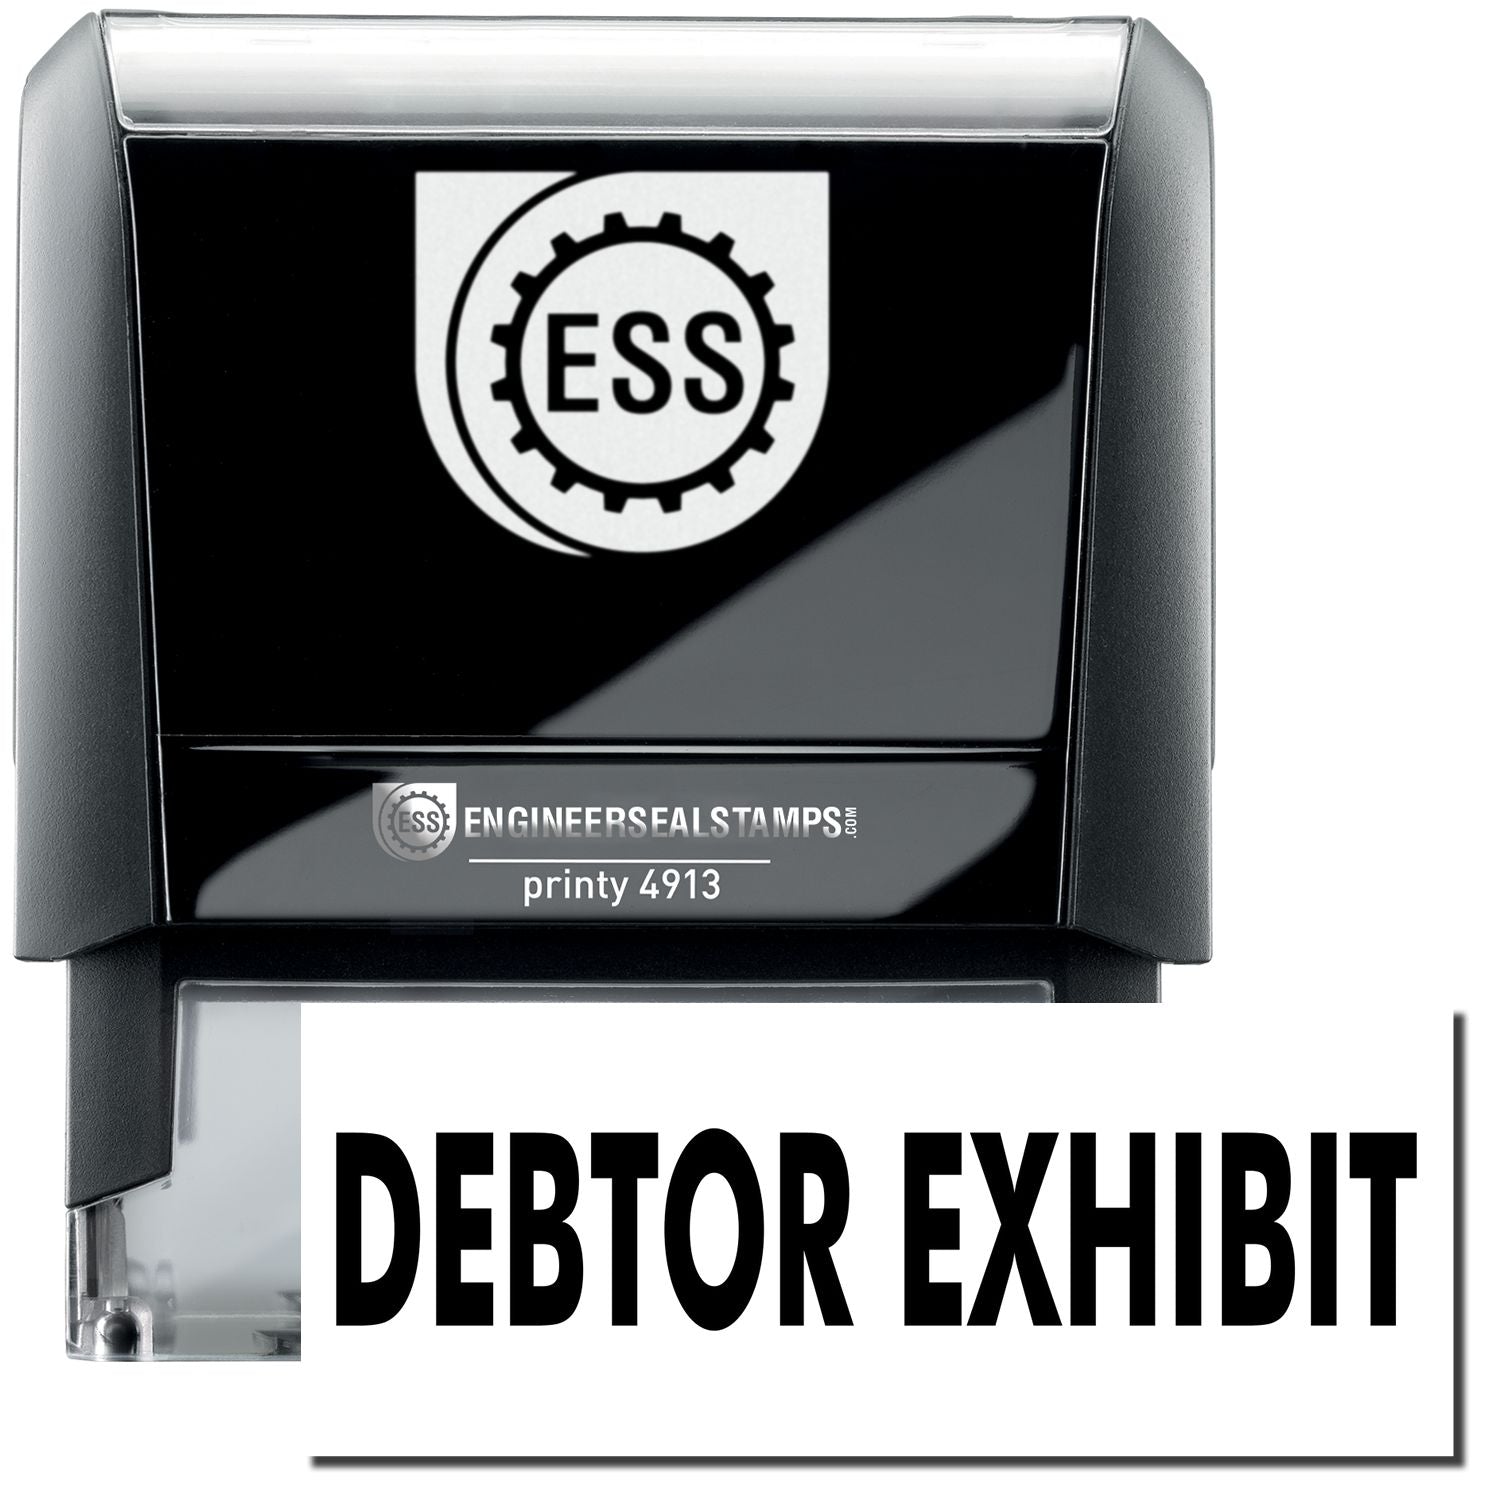 A self-inking stamp with a stamped image showing how the text "DEBTOR EXHIBIT" in a large bold font is displayed by it.